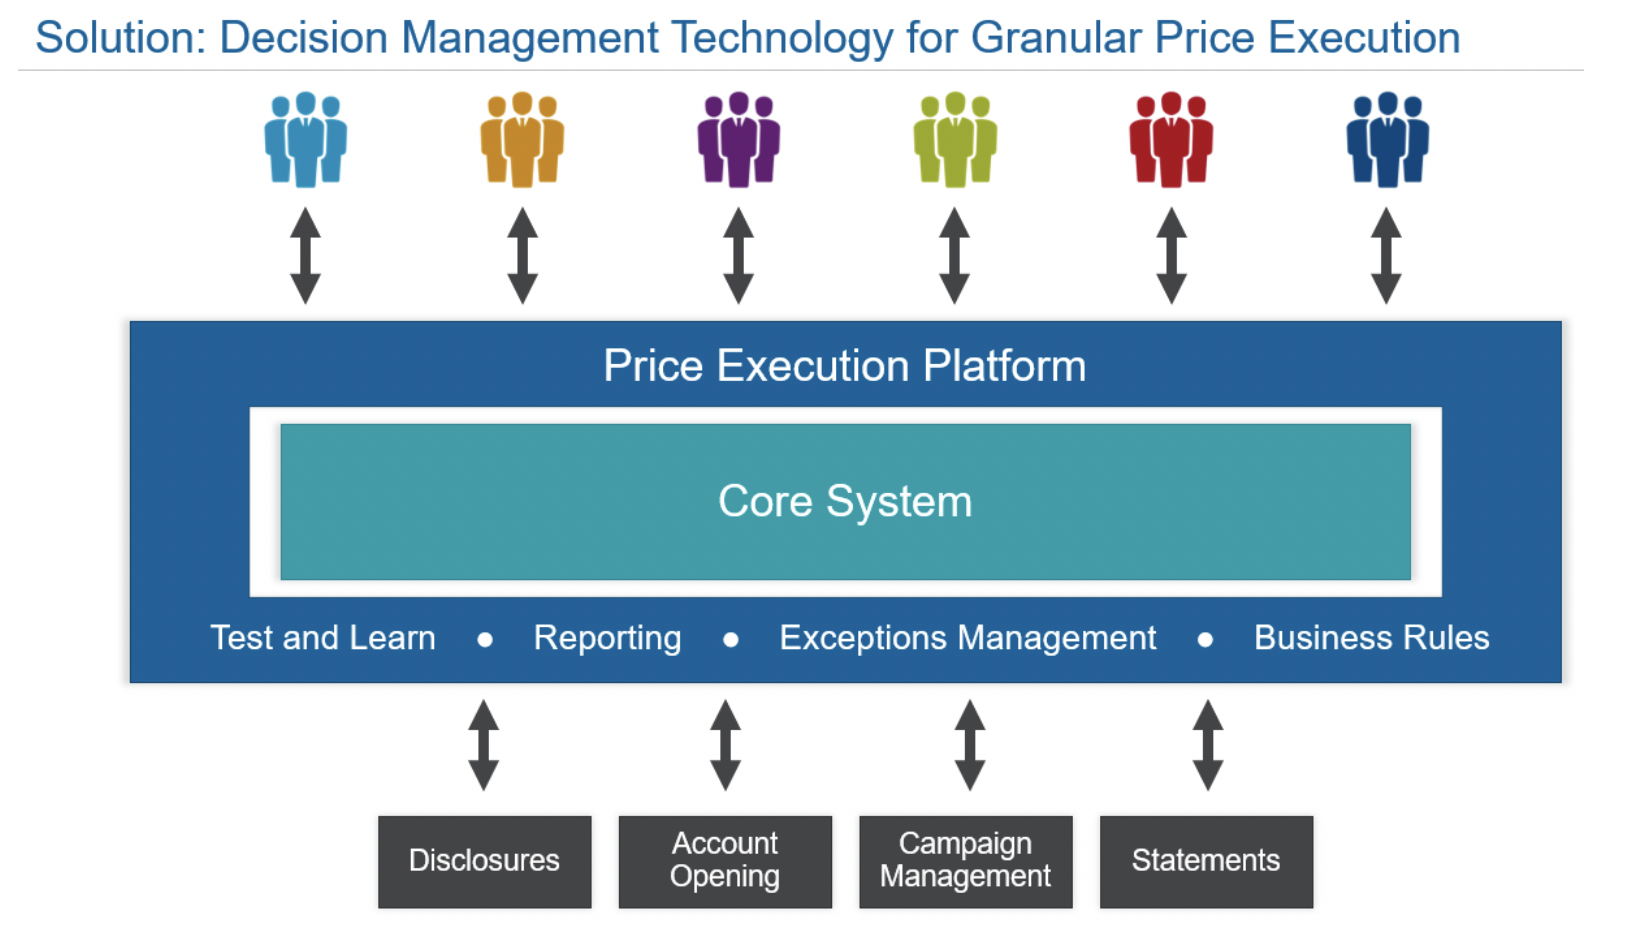 Decision Management Technology for Granular Price Execution